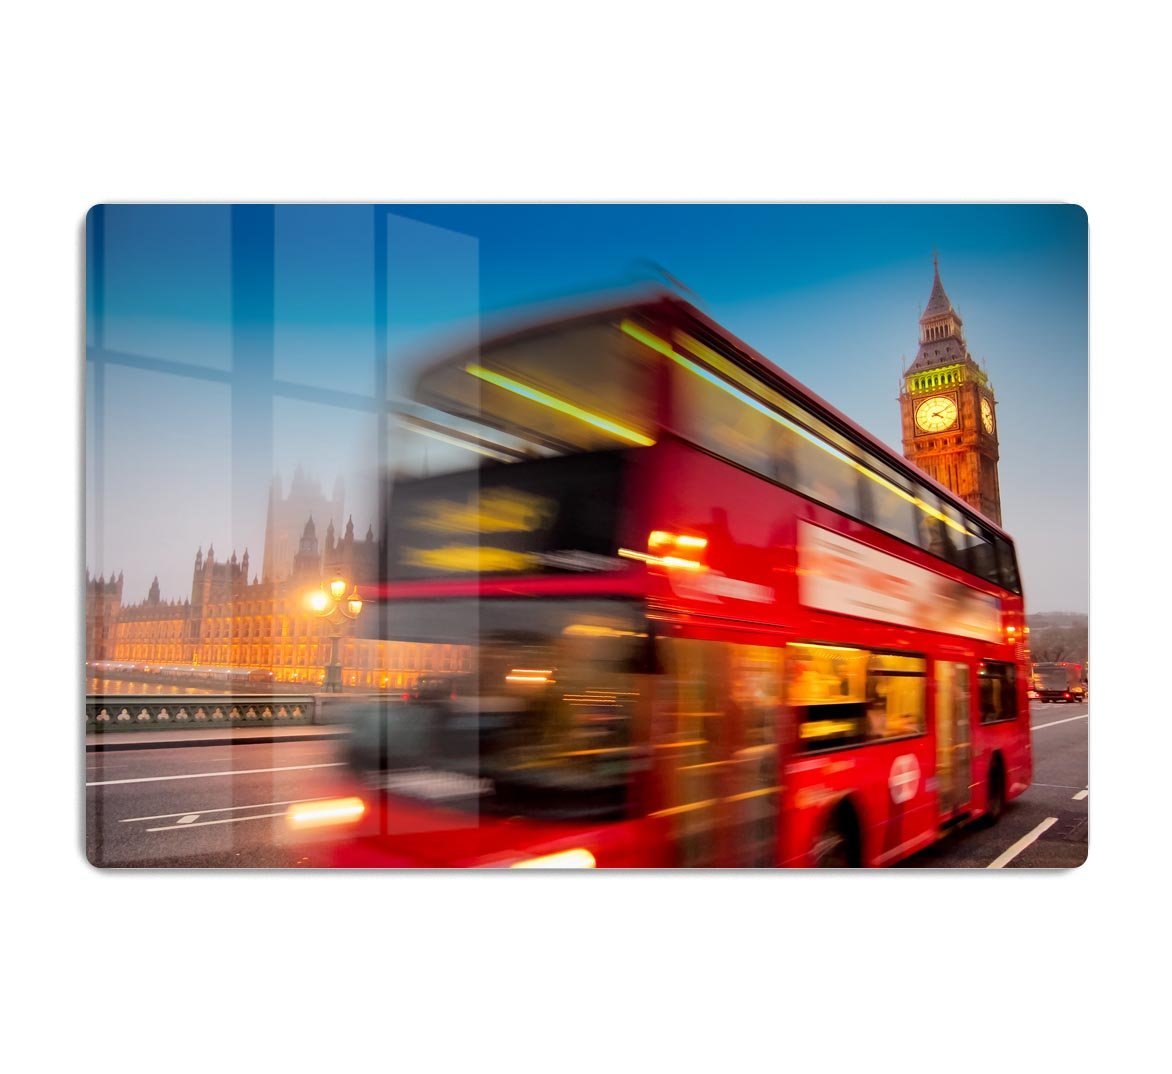 Houses Of Parliament red double-decker bus HD Metal Print